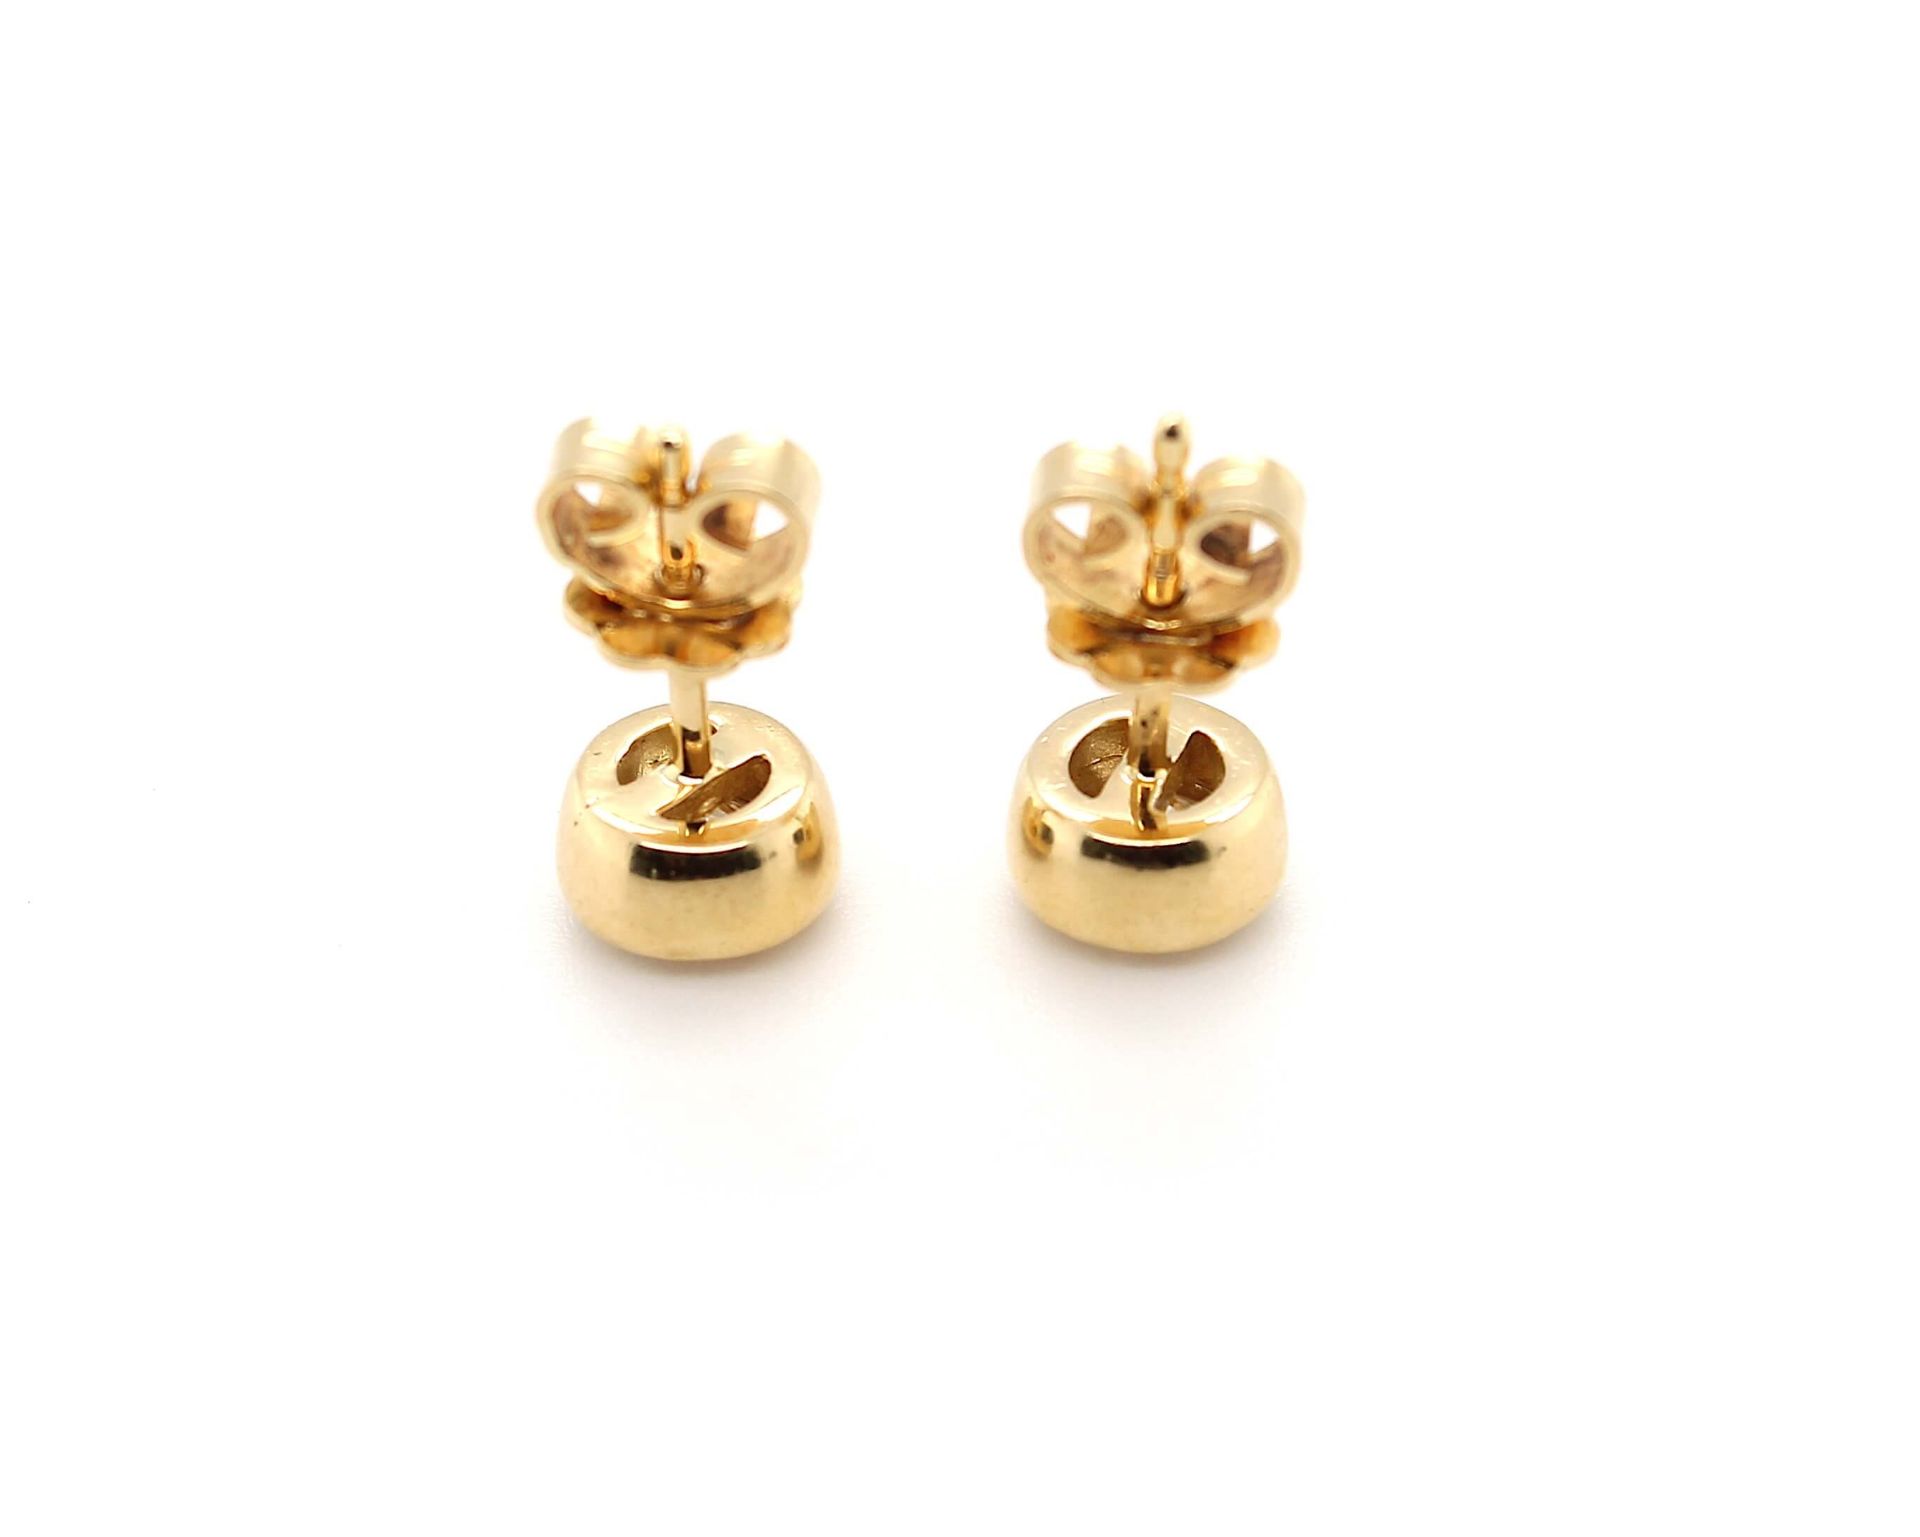 Pair of ear studs with a total of ca. 1.5 ct brilliants - Image 3 of 3